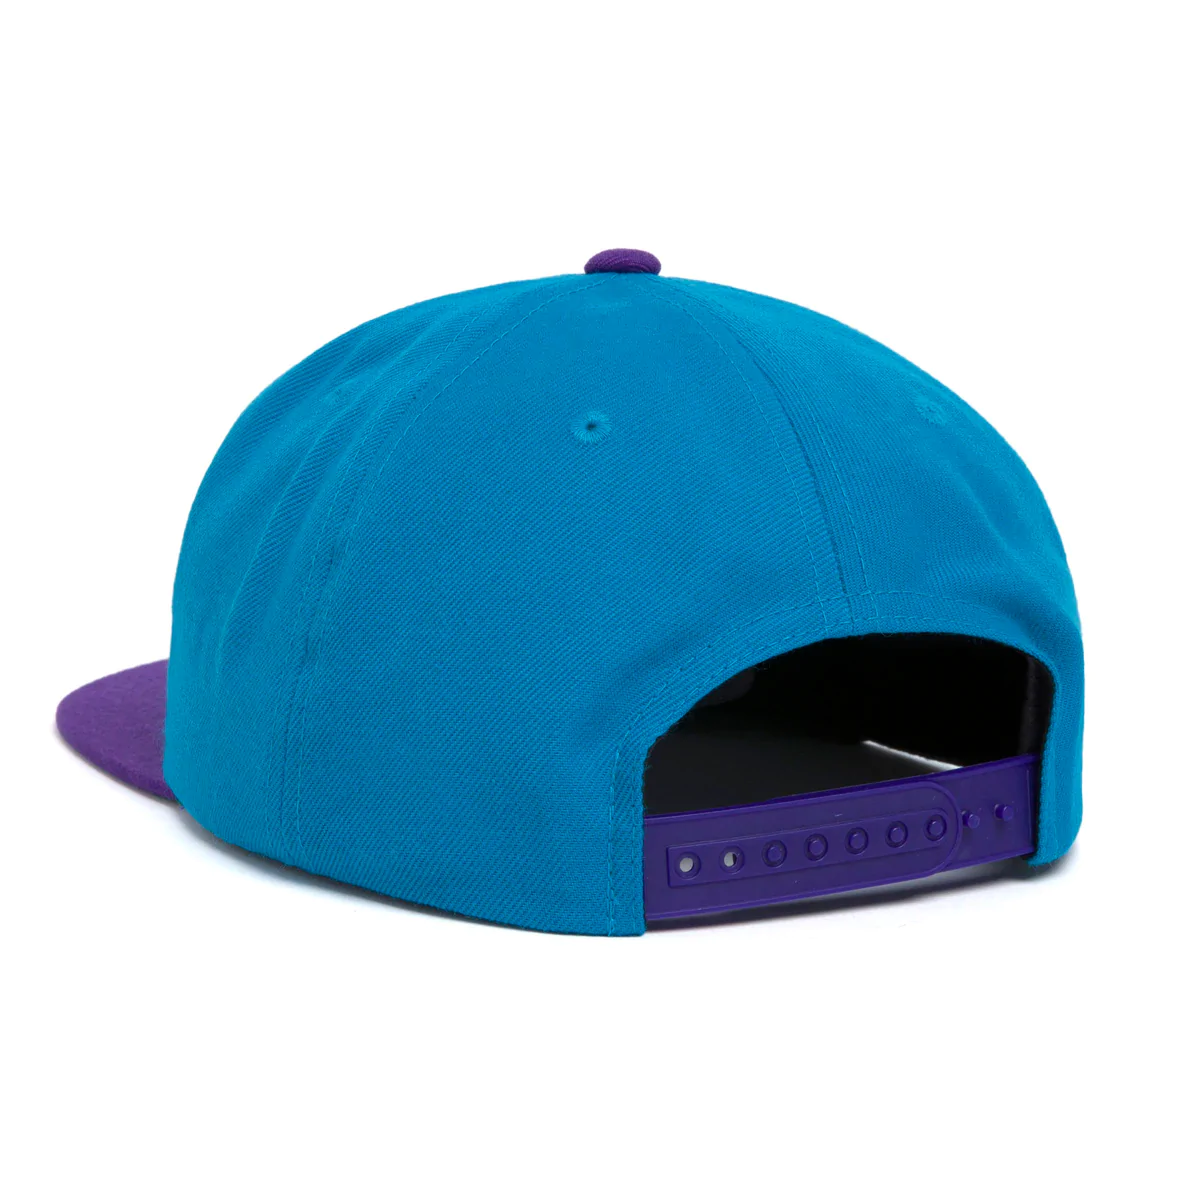 HUF - TORCH MMXXII SNAPBACK - BLUE